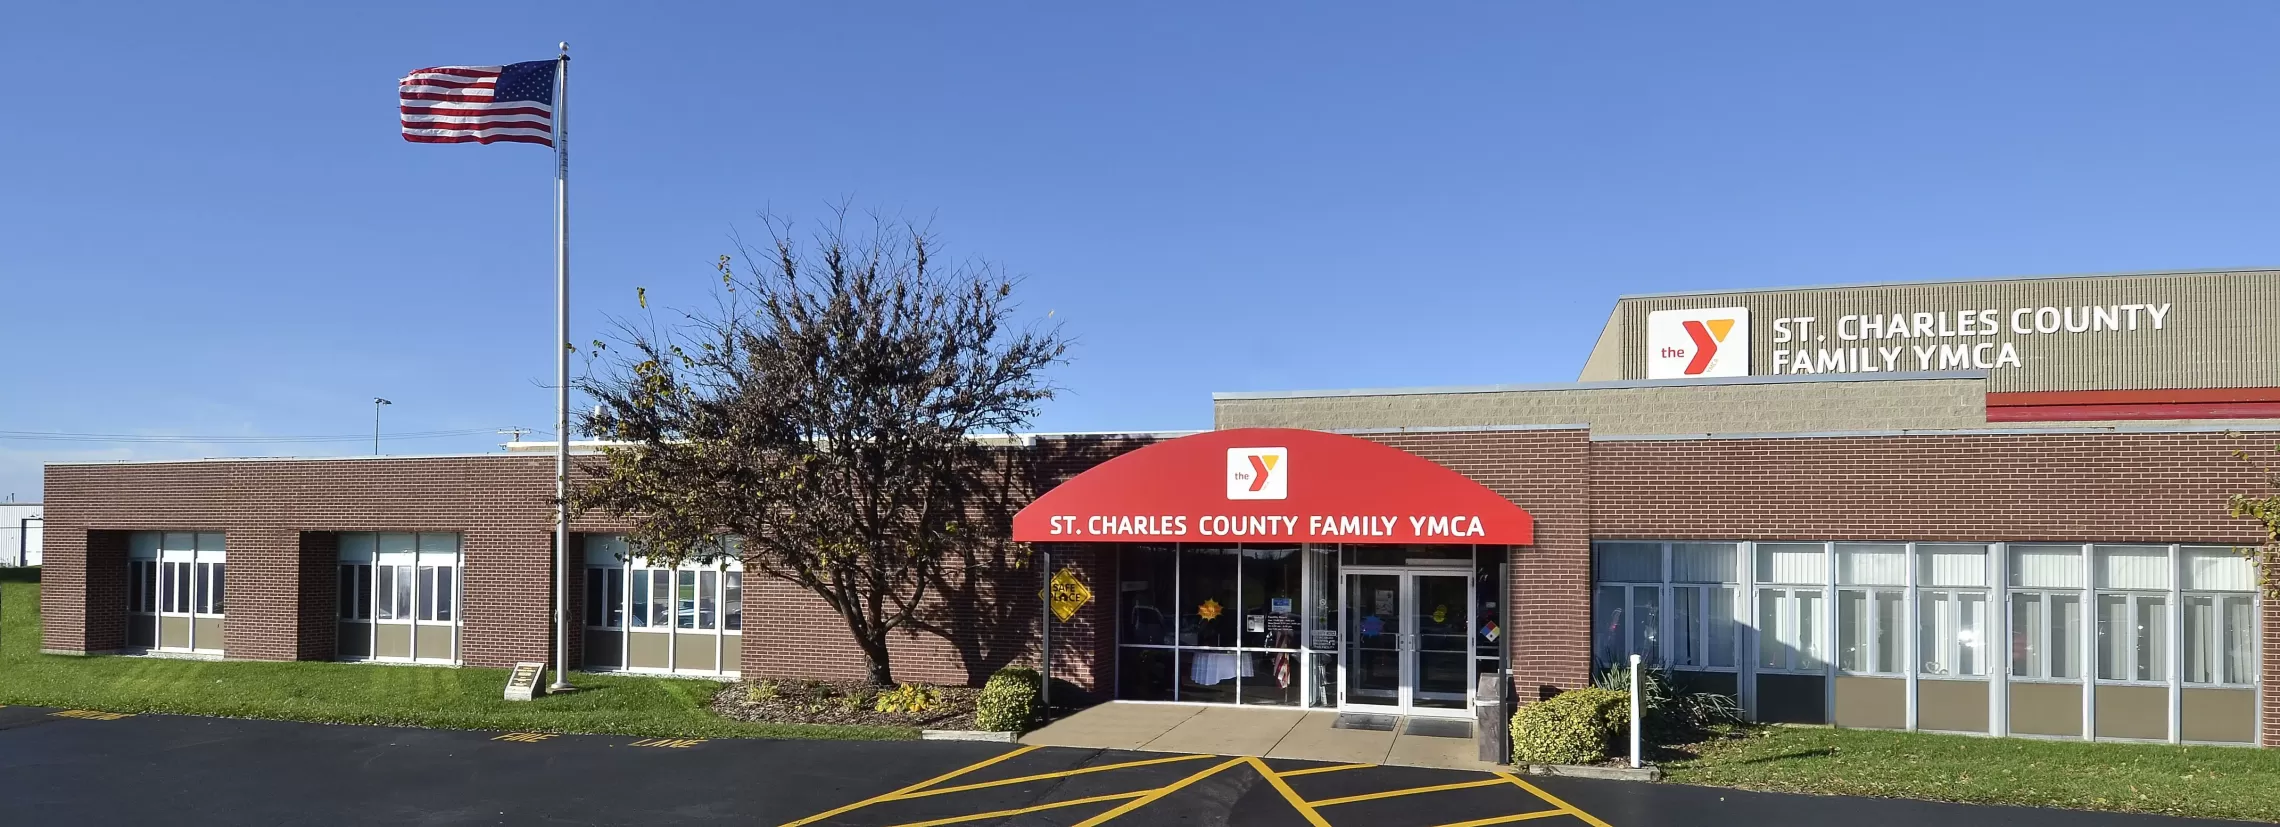 St. Charles County Family YMCA